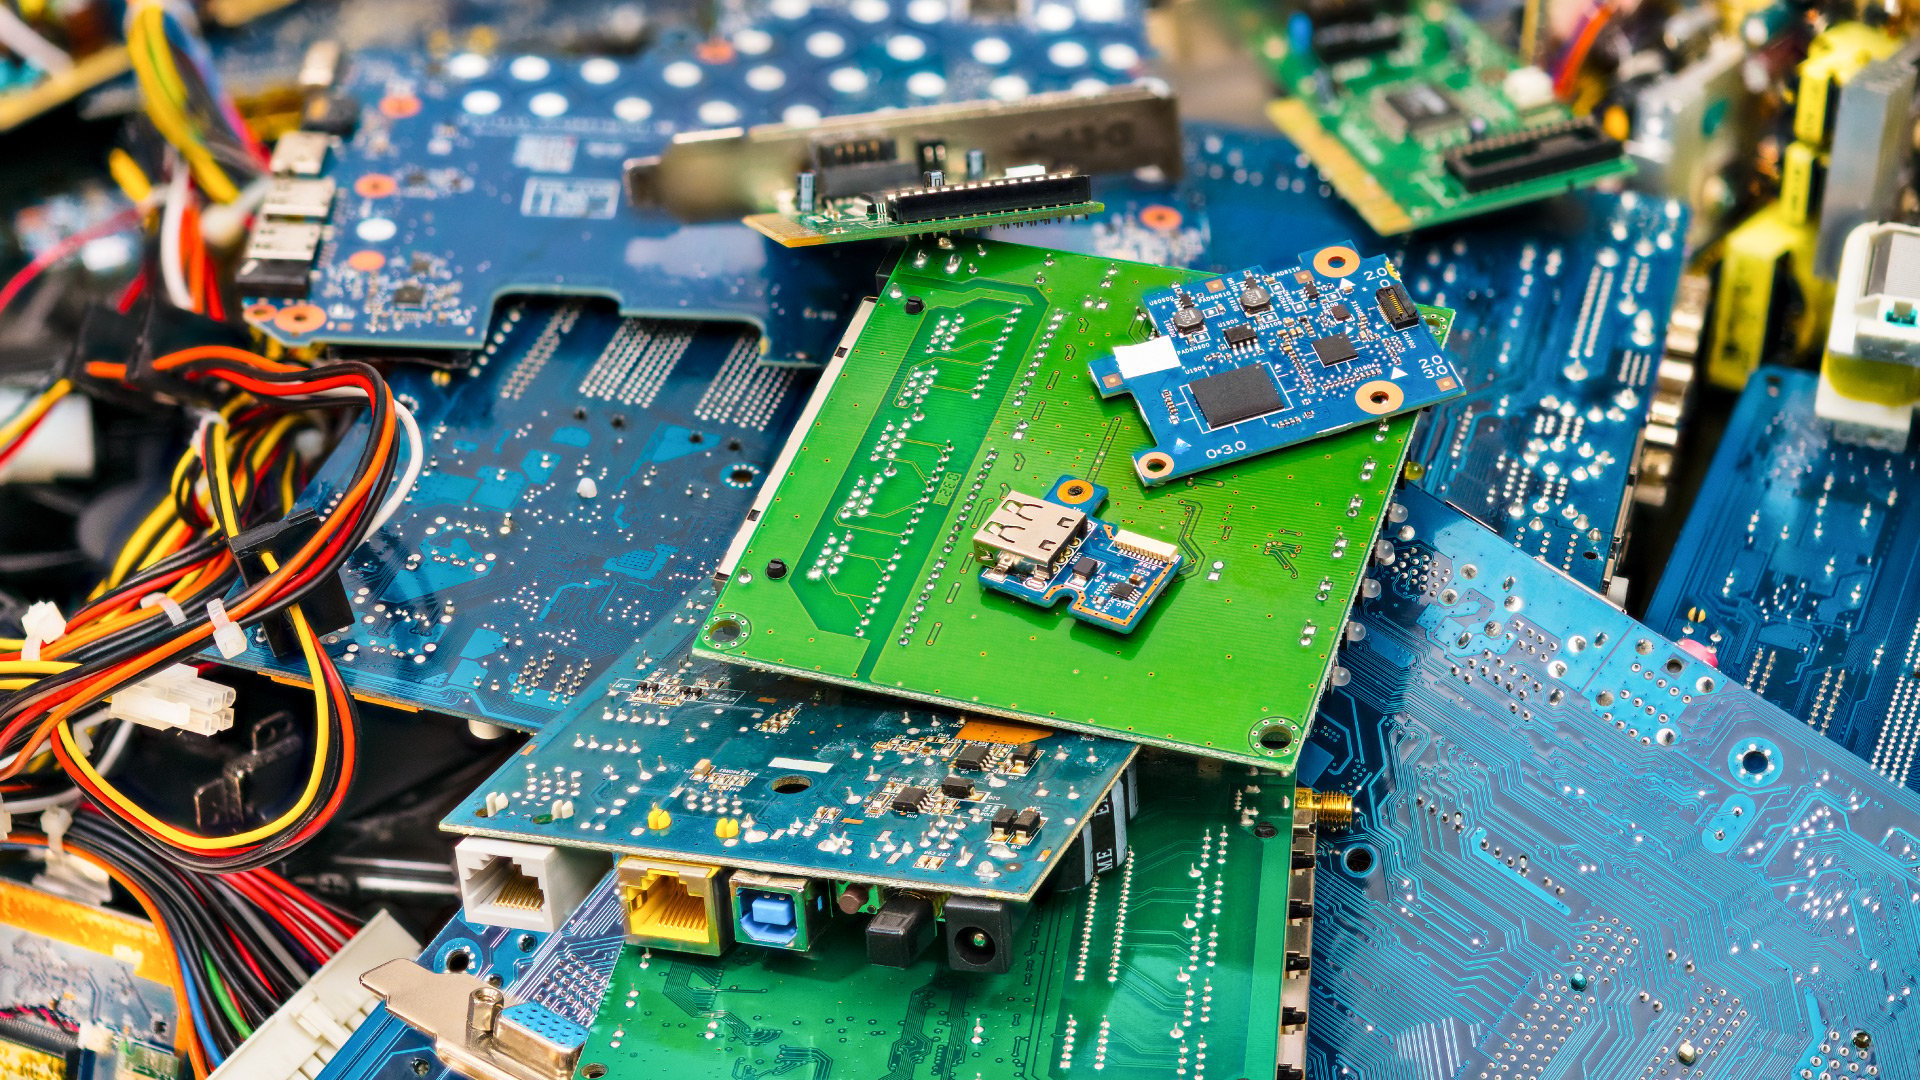 Green and blue computer chips sit on a pile of electronic waste